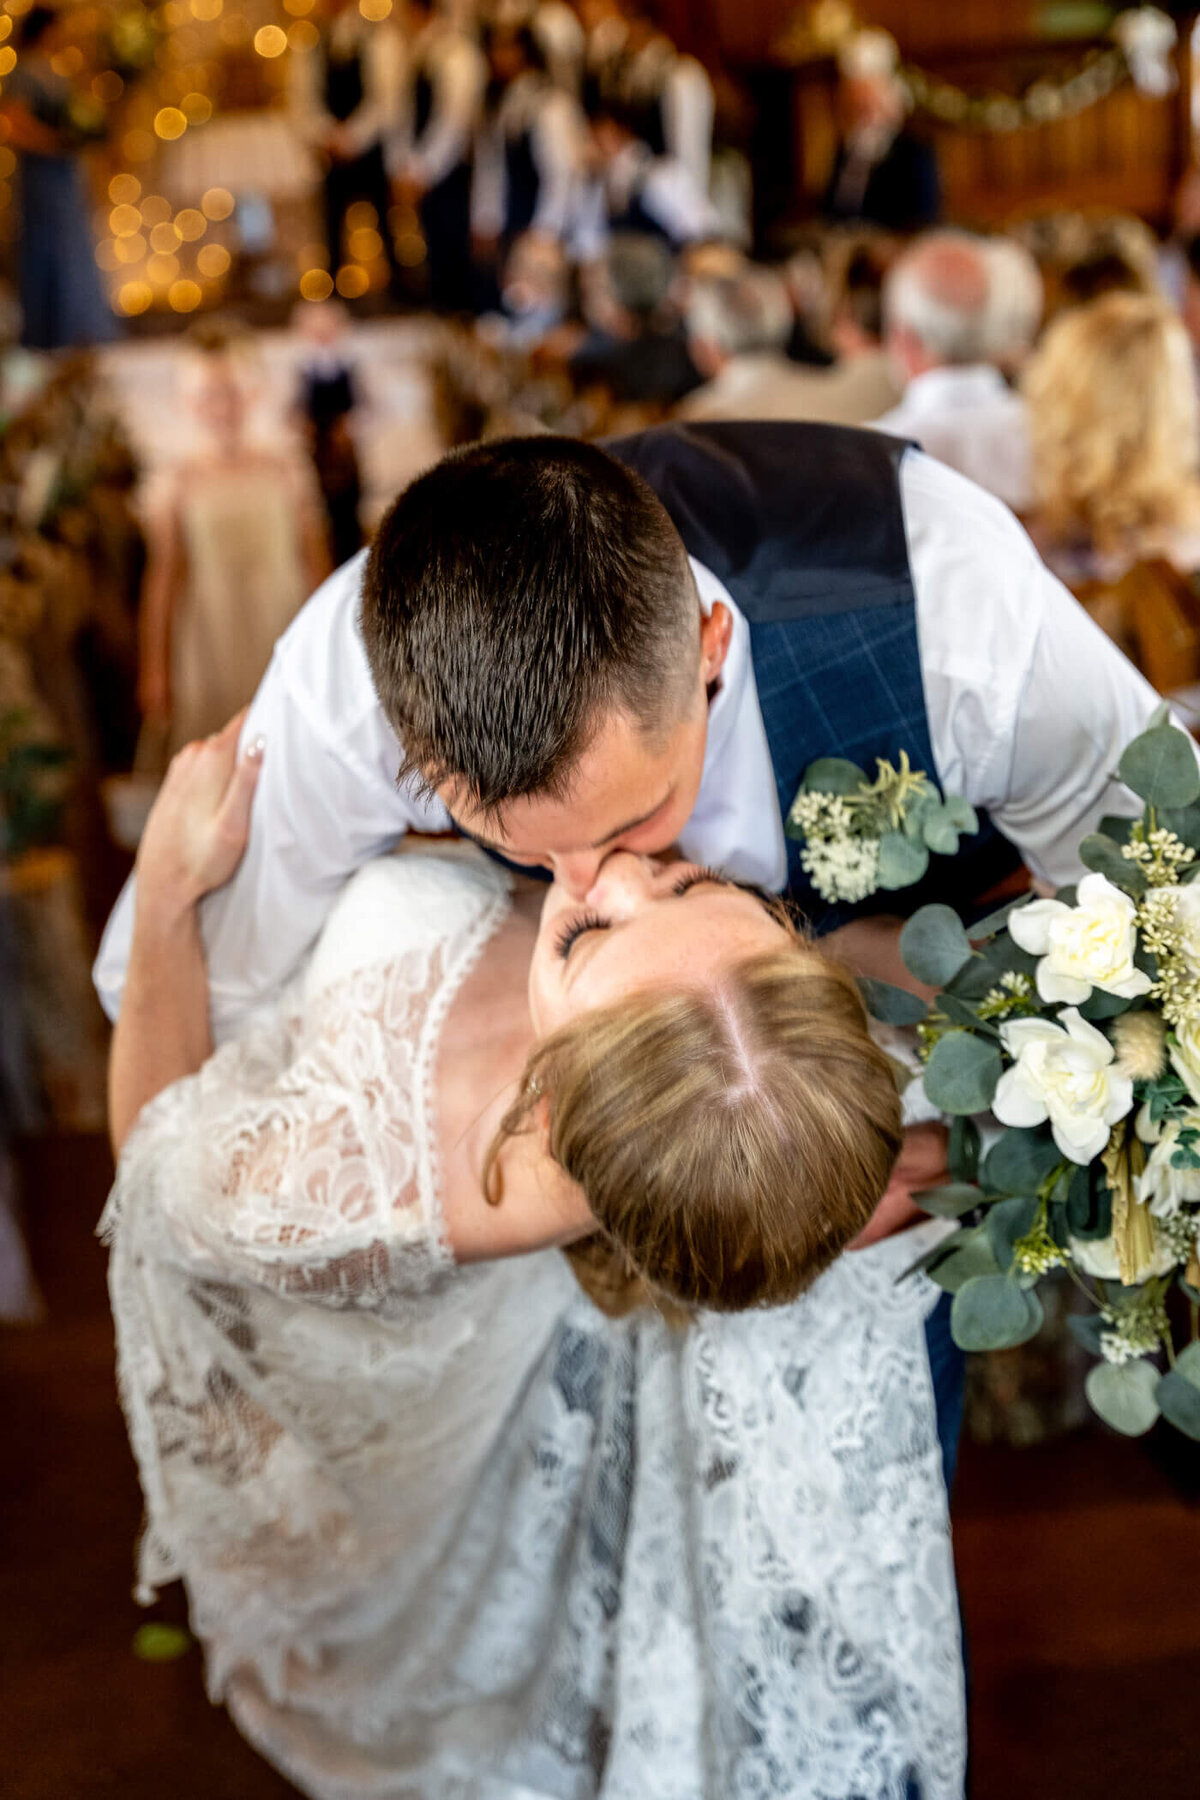 dramatic wedding photography depicting a bride and groom share a dip kiss during their exit from the ceremony location in Pittsburgh PA.